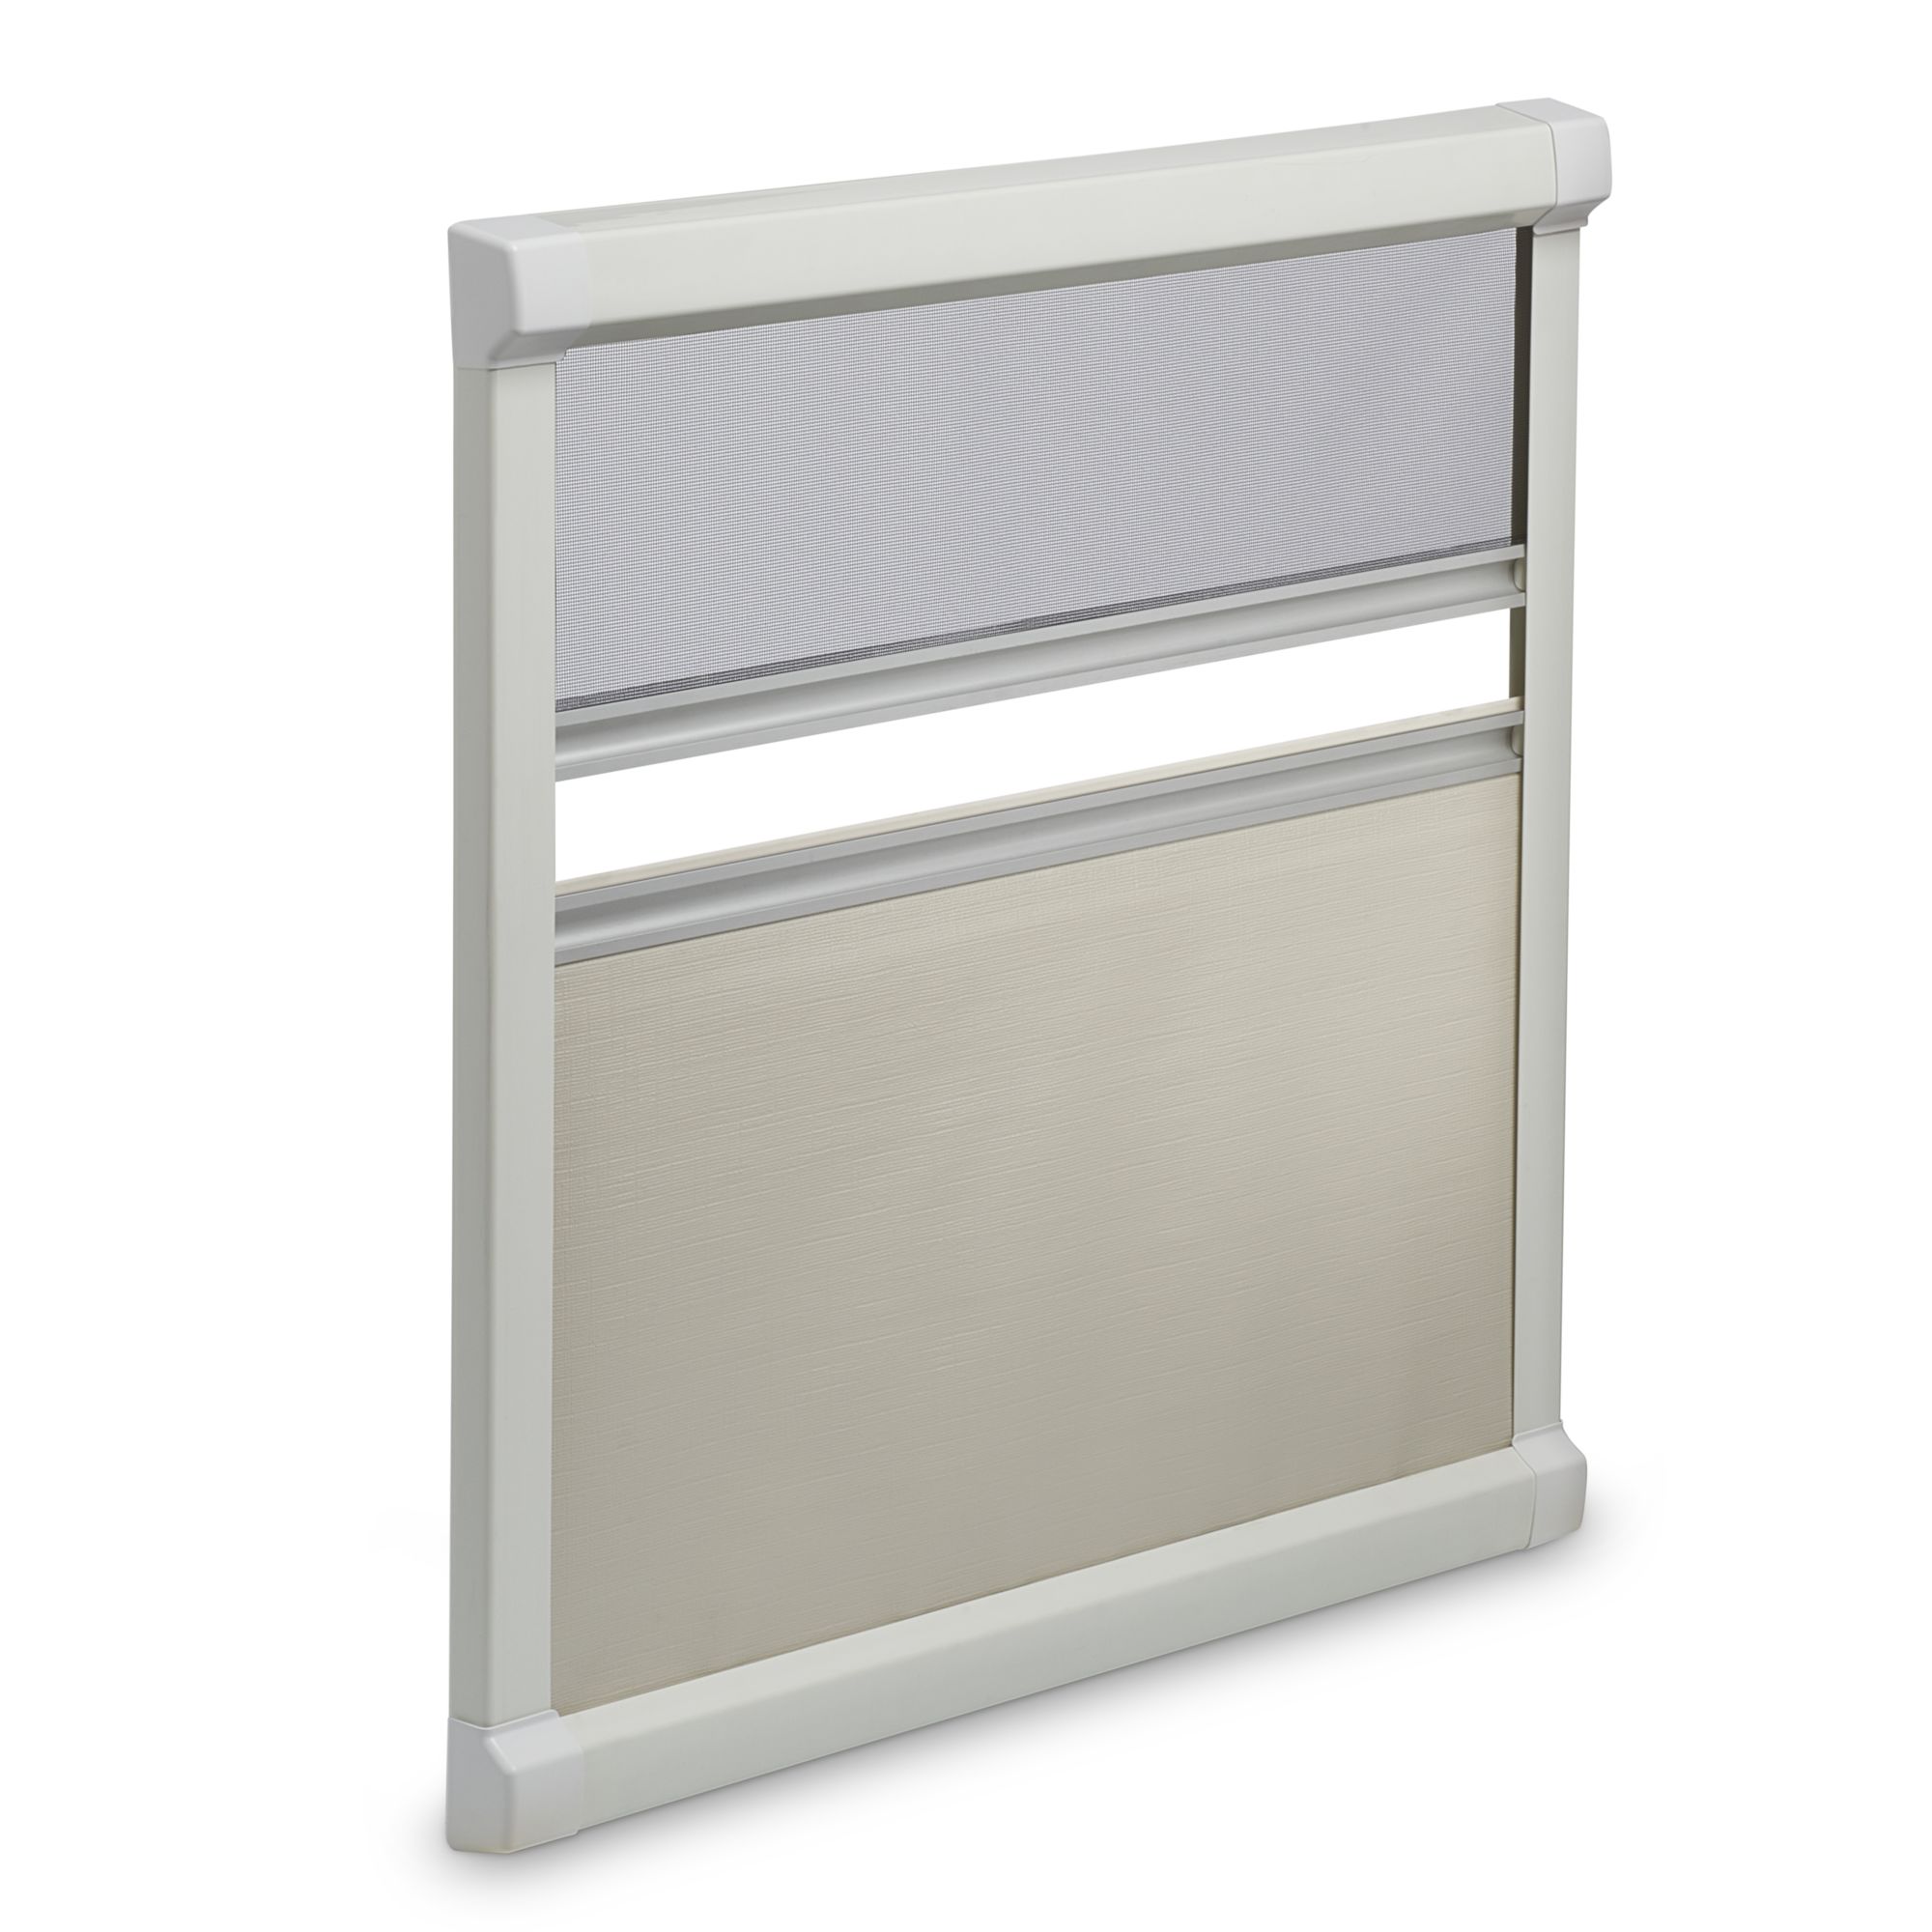 Dometic DB1R Rooflight Roller Blind, 410 x 480 mm, cream-white